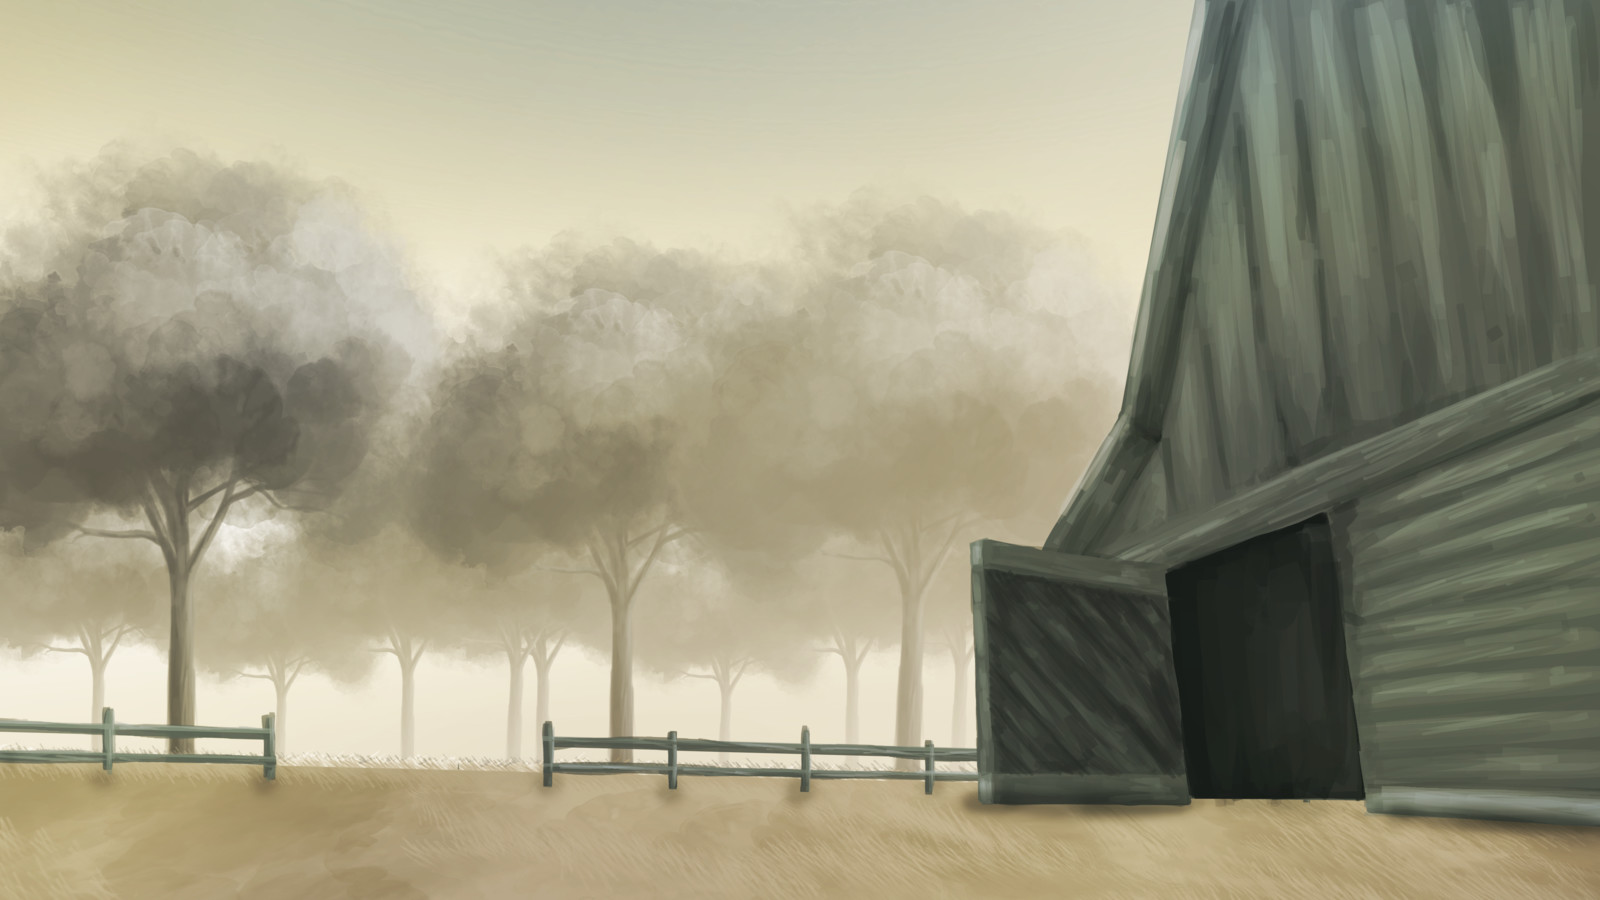 An screen from the opening cinematic, featuring the farm of which the main character, Brielle and her childhood best friend, Matthew, reside.